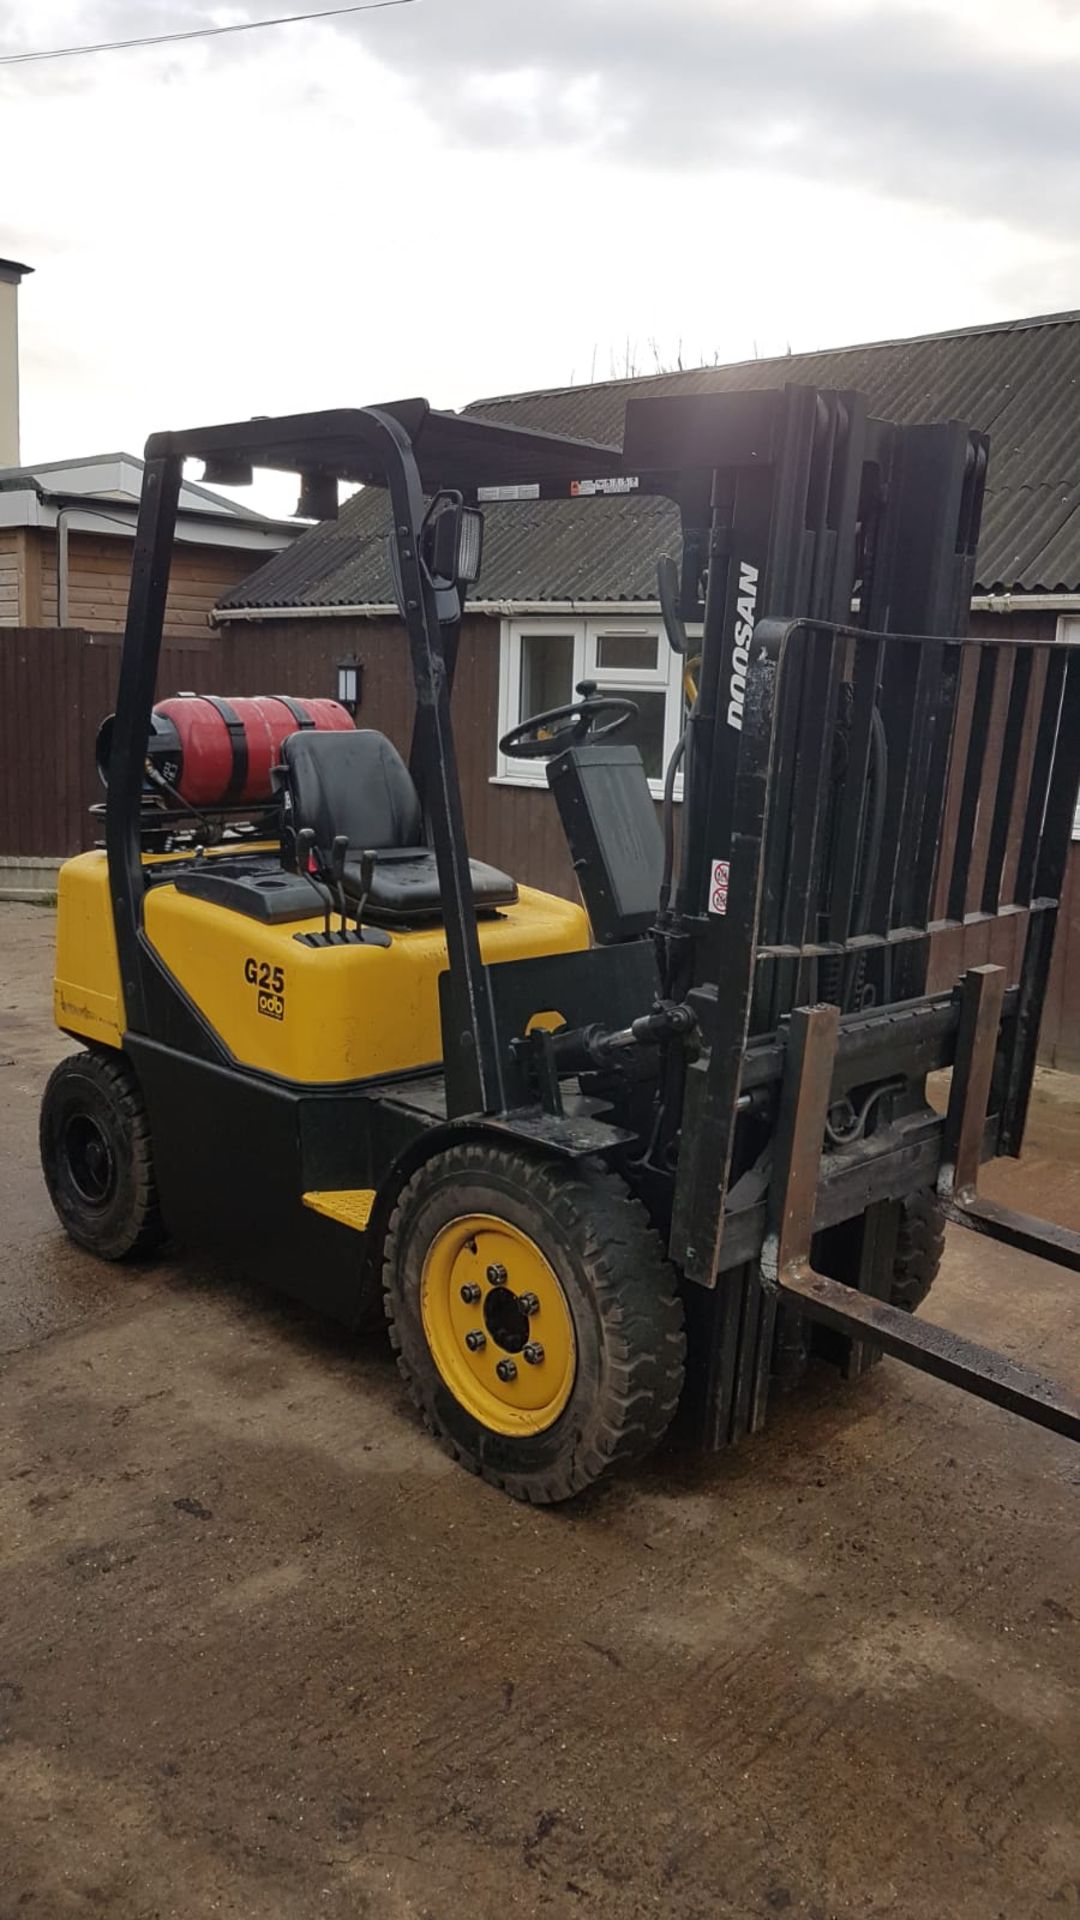 DAEWOO G25 GAS POWERED FORKLIFT TRUCK, 3 STAGE TRIPLE MAST, SIDE SHIFT, 2.5 TONNE RATED CAPACITY. - Image 4 of 4